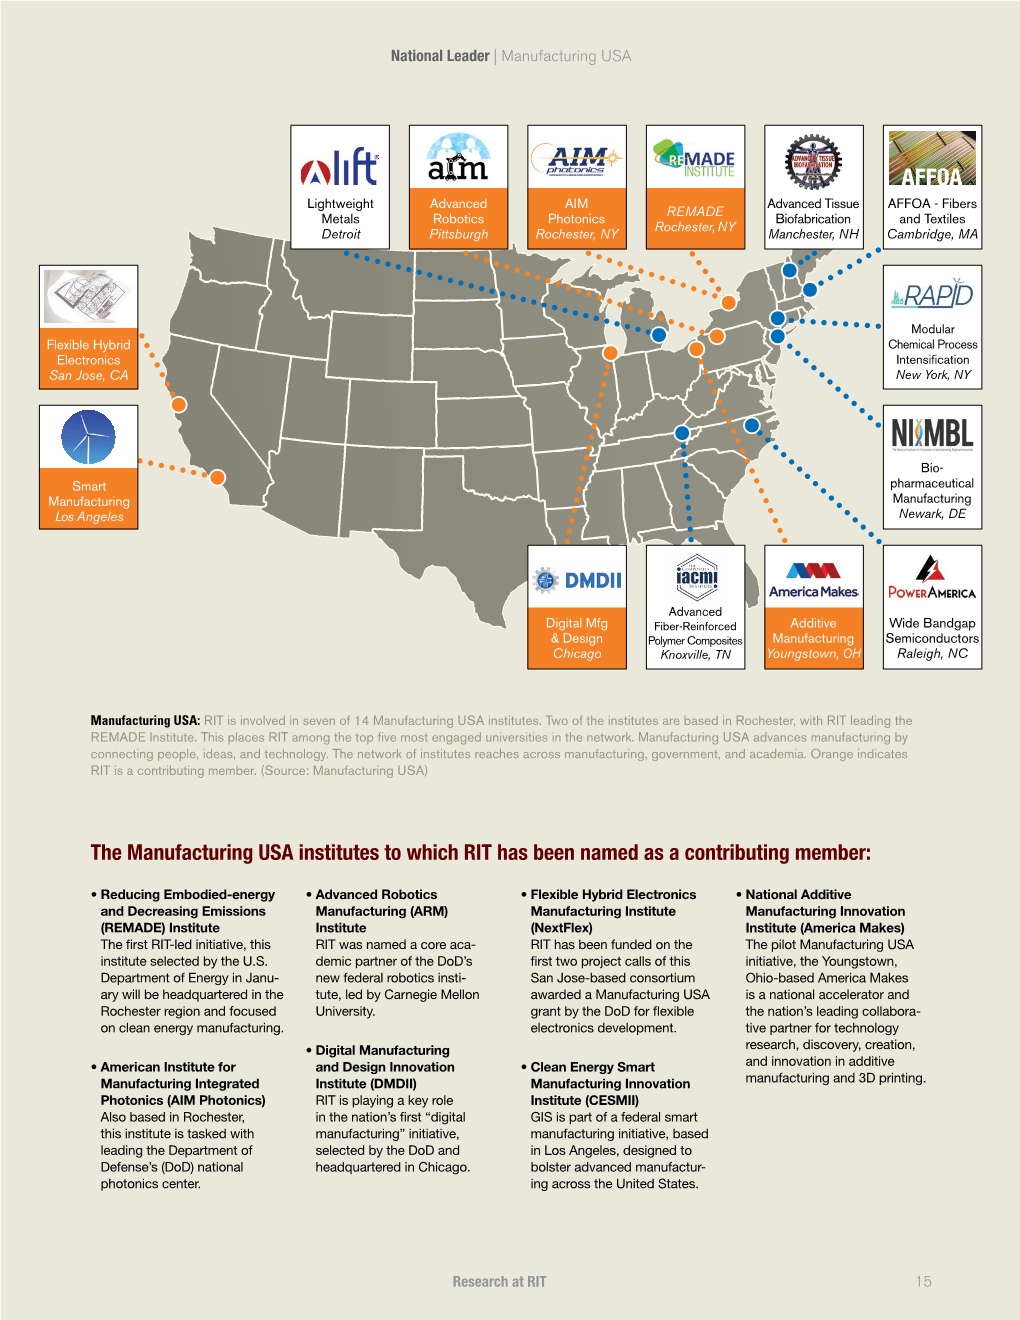 The Manufacturing USA Institutes to Which RIT Has Been Named As a Contributing Member